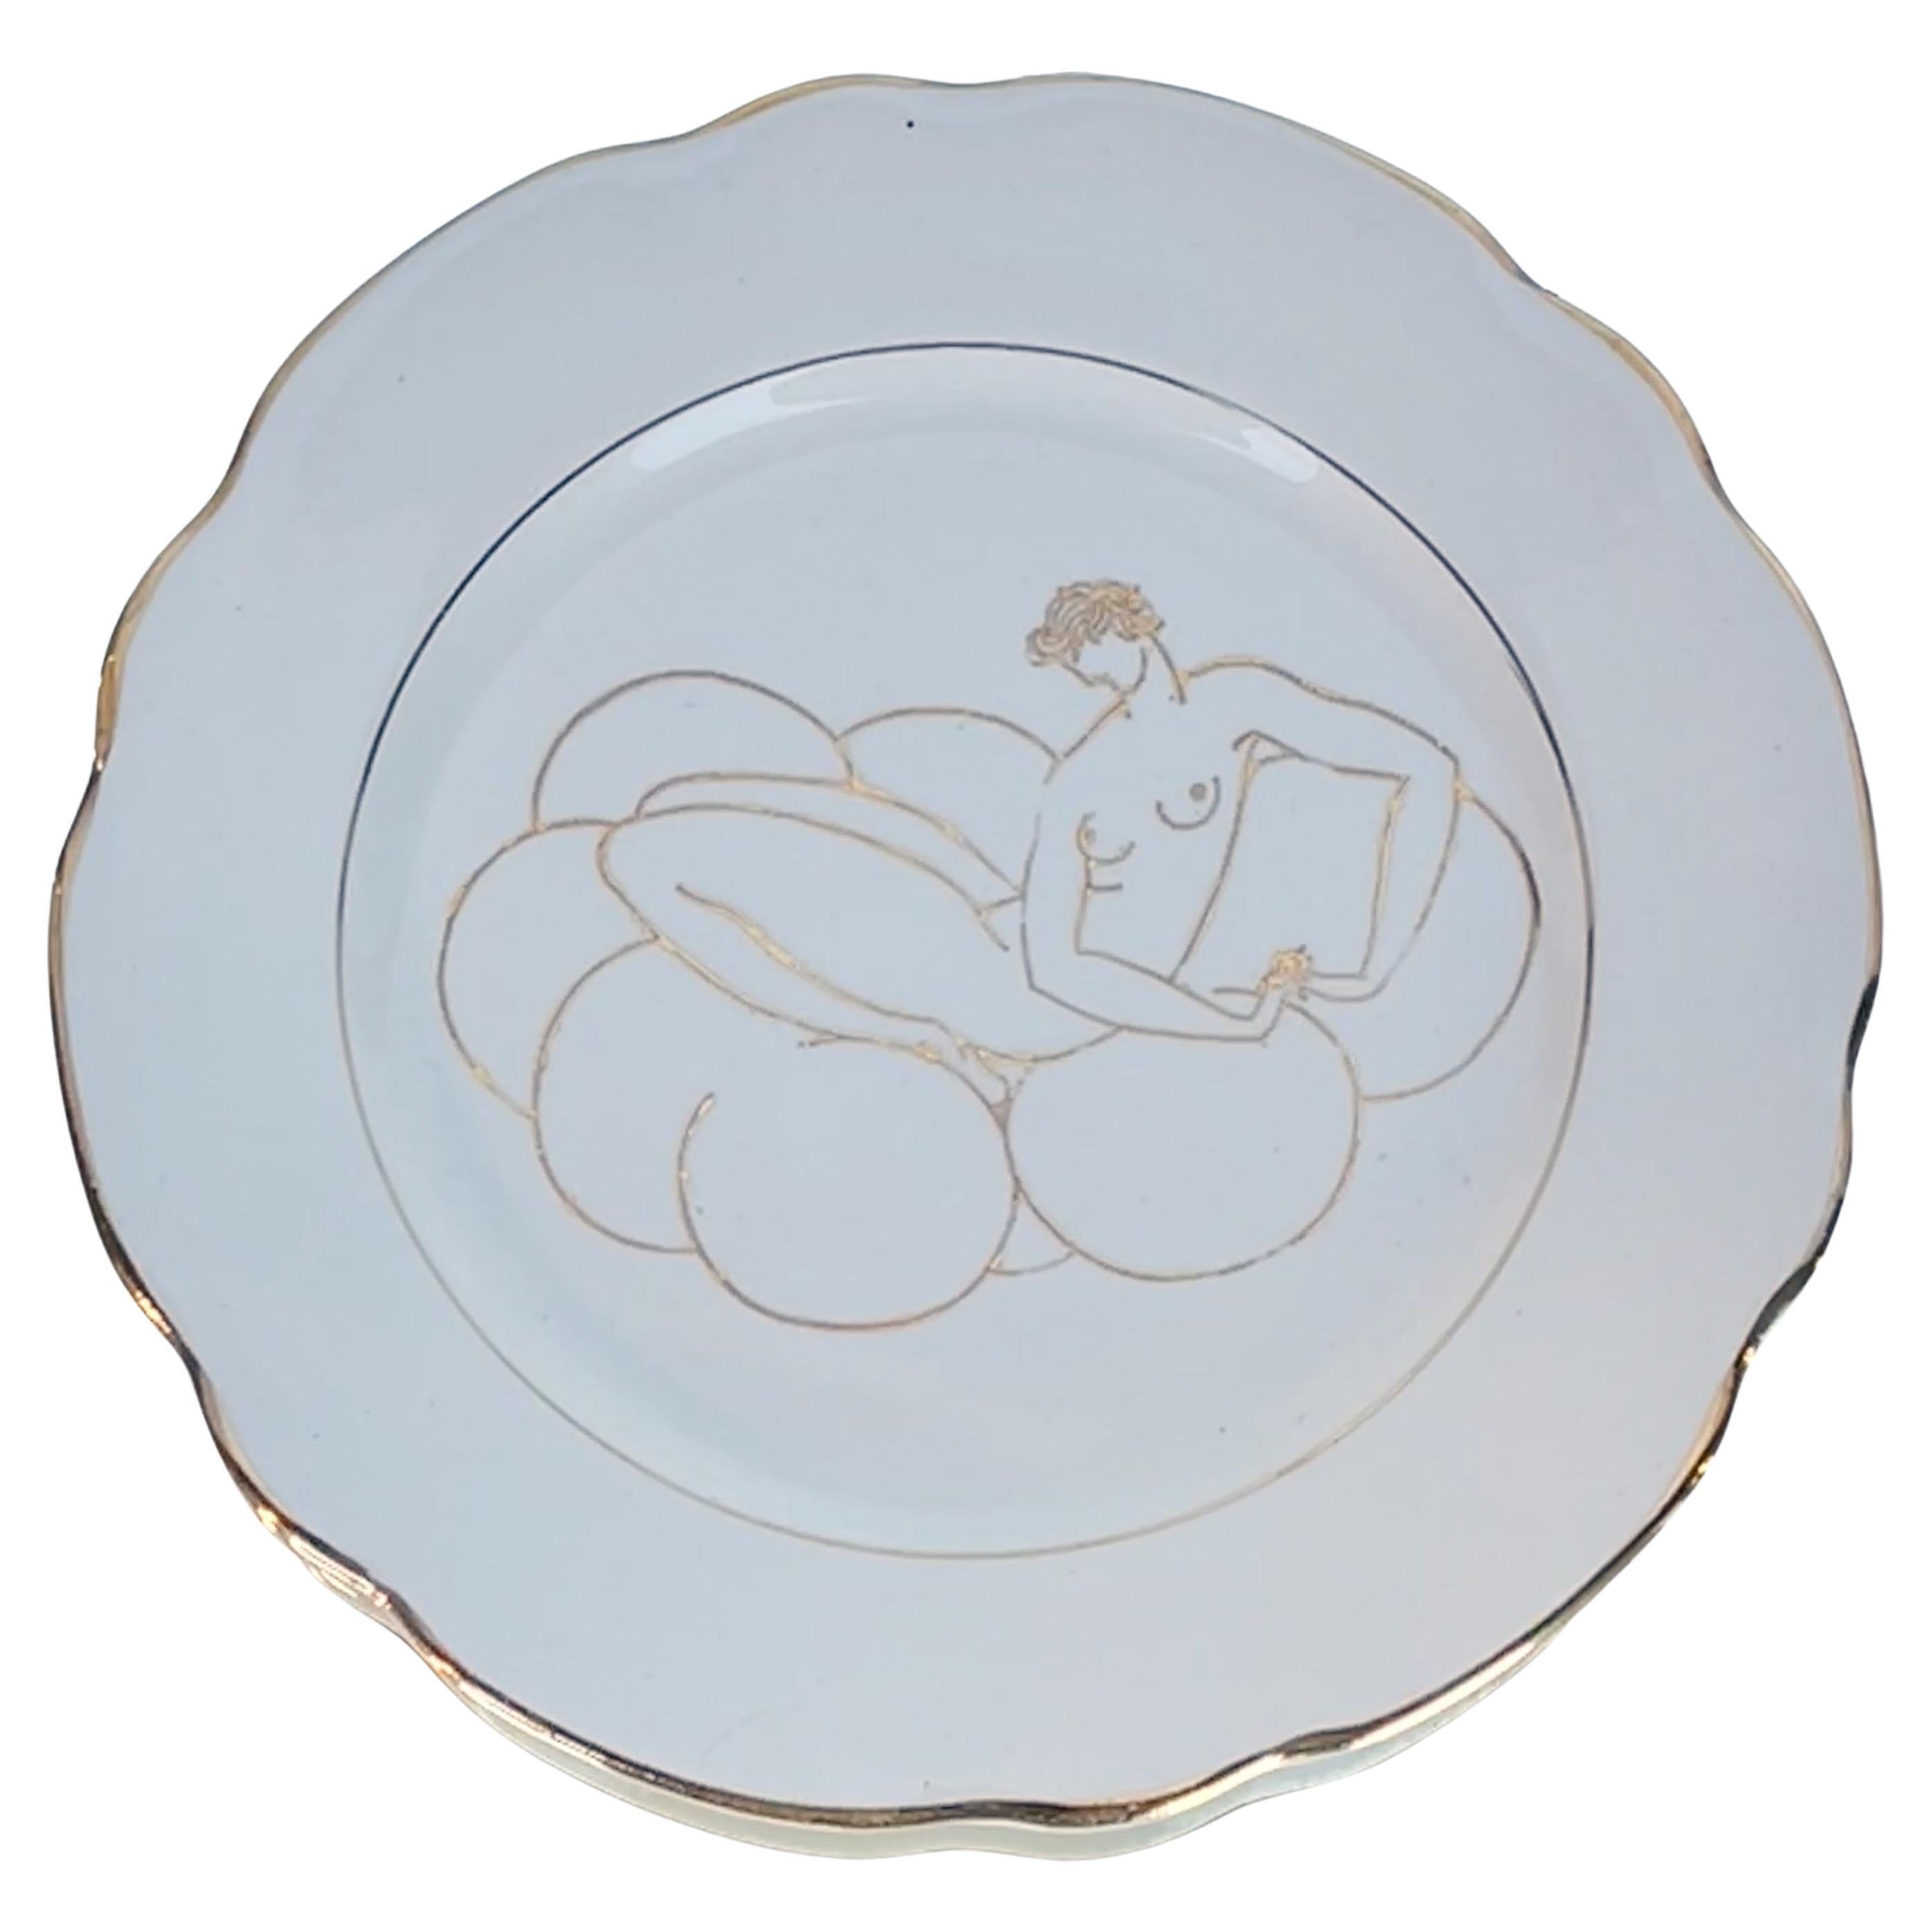 Gio Ponti for Richard Ginori Le Mie Donne Plate 1937 For Sale 5